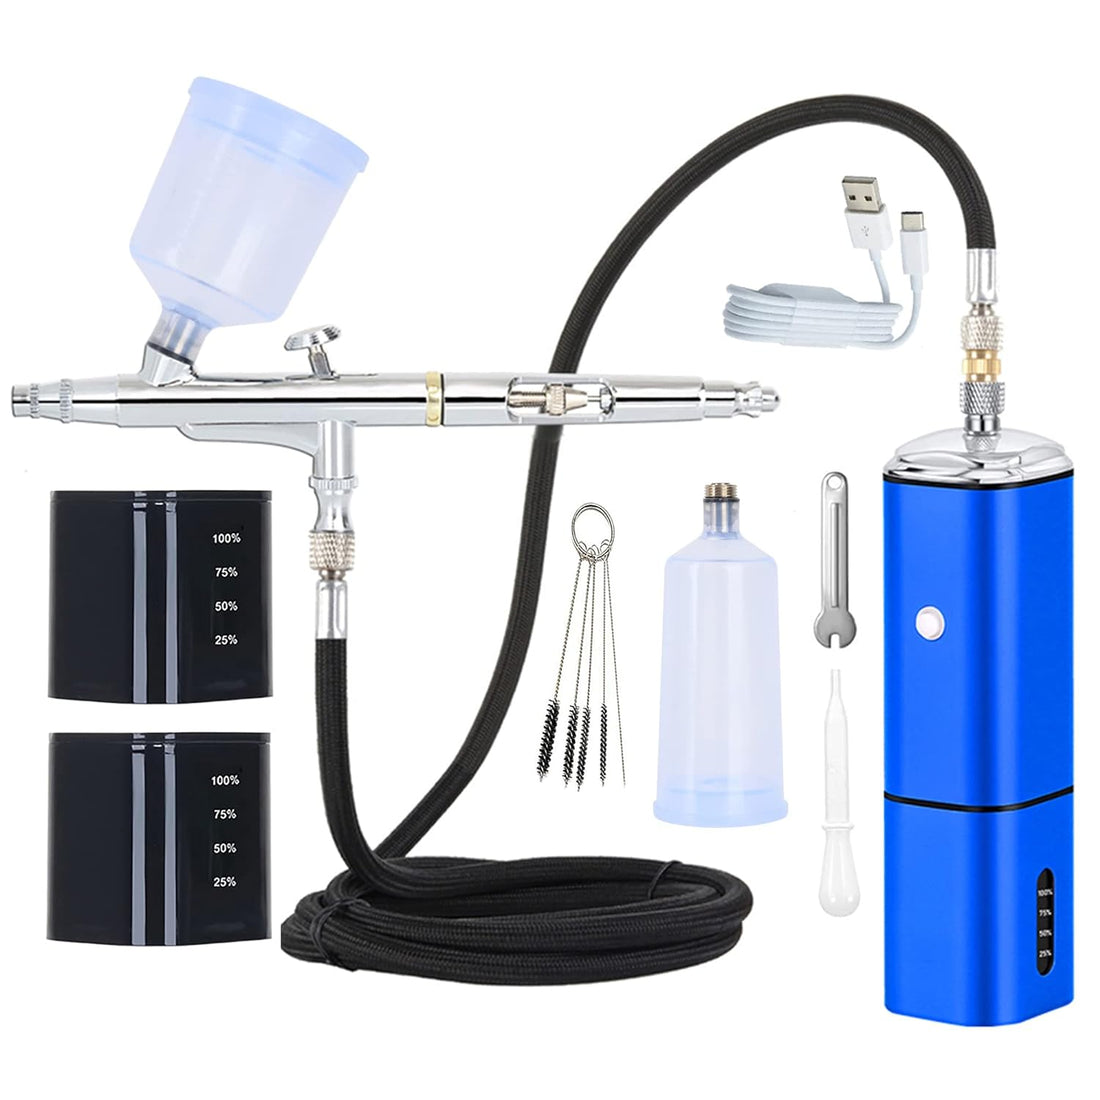 Airbrush Kit with Compressor Dual Action Airbrush Set Rechargeable Detachable Air Brush Gun Portable High Pressure Airbrush Kit for Makeup Art Craft Makeup Tattoo Model Barber